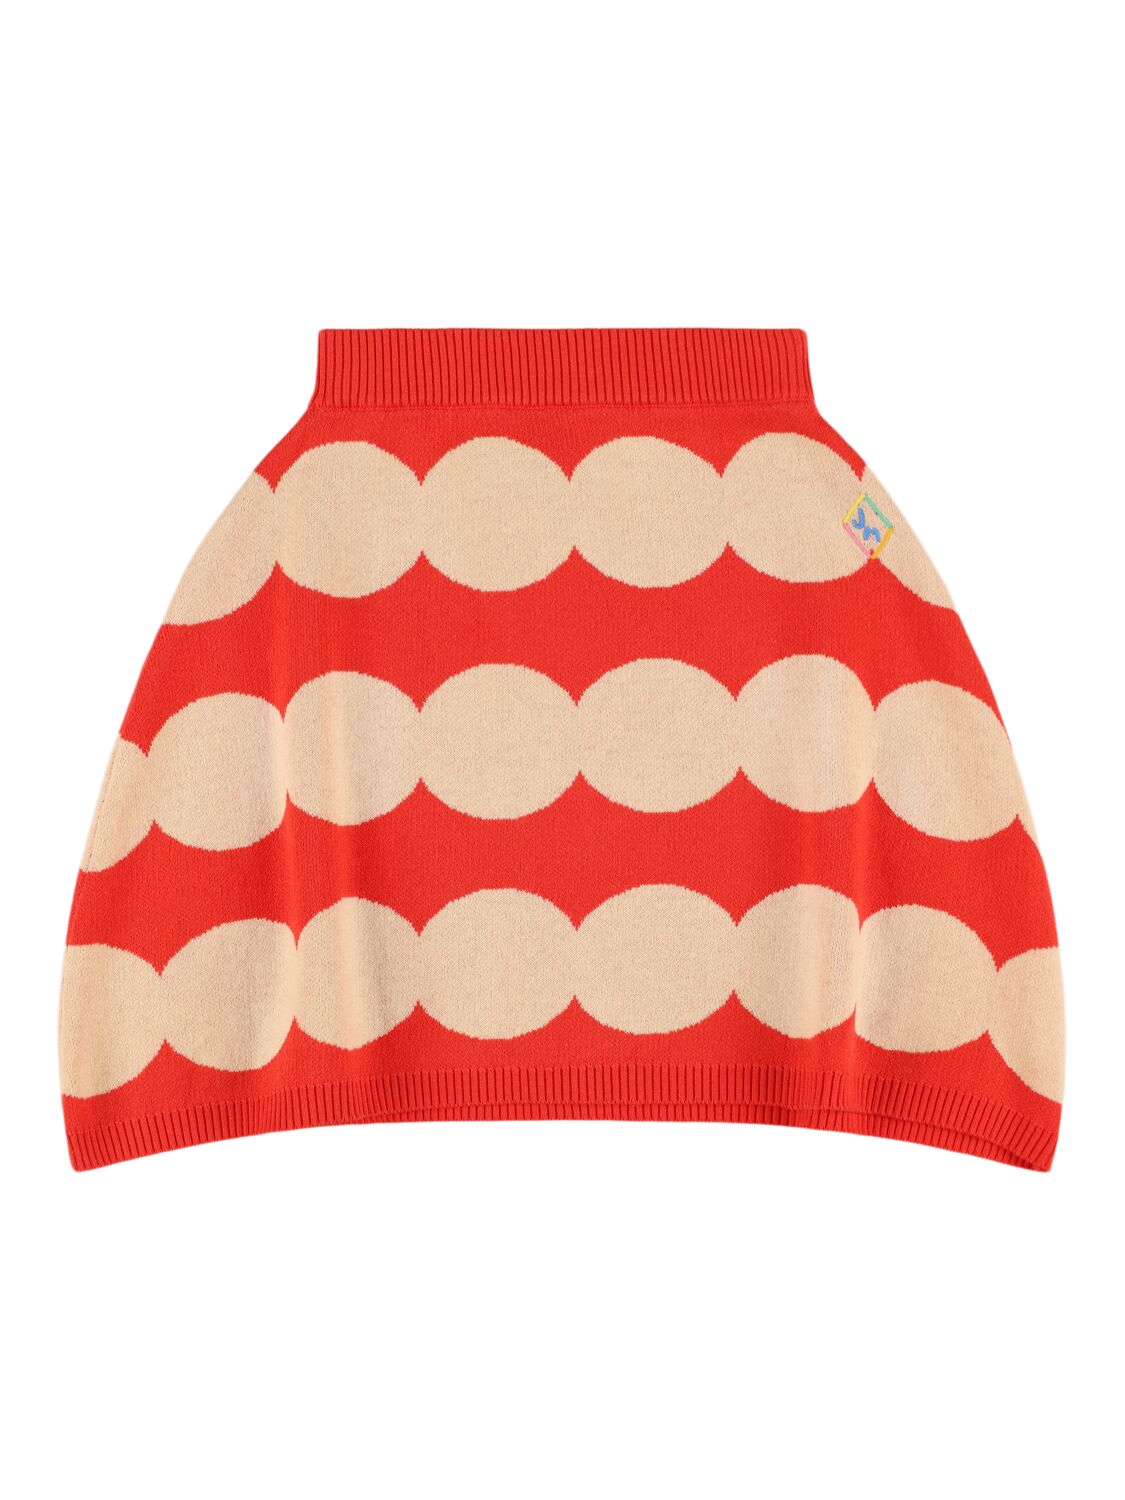 Image of Knit Cotton Skirt